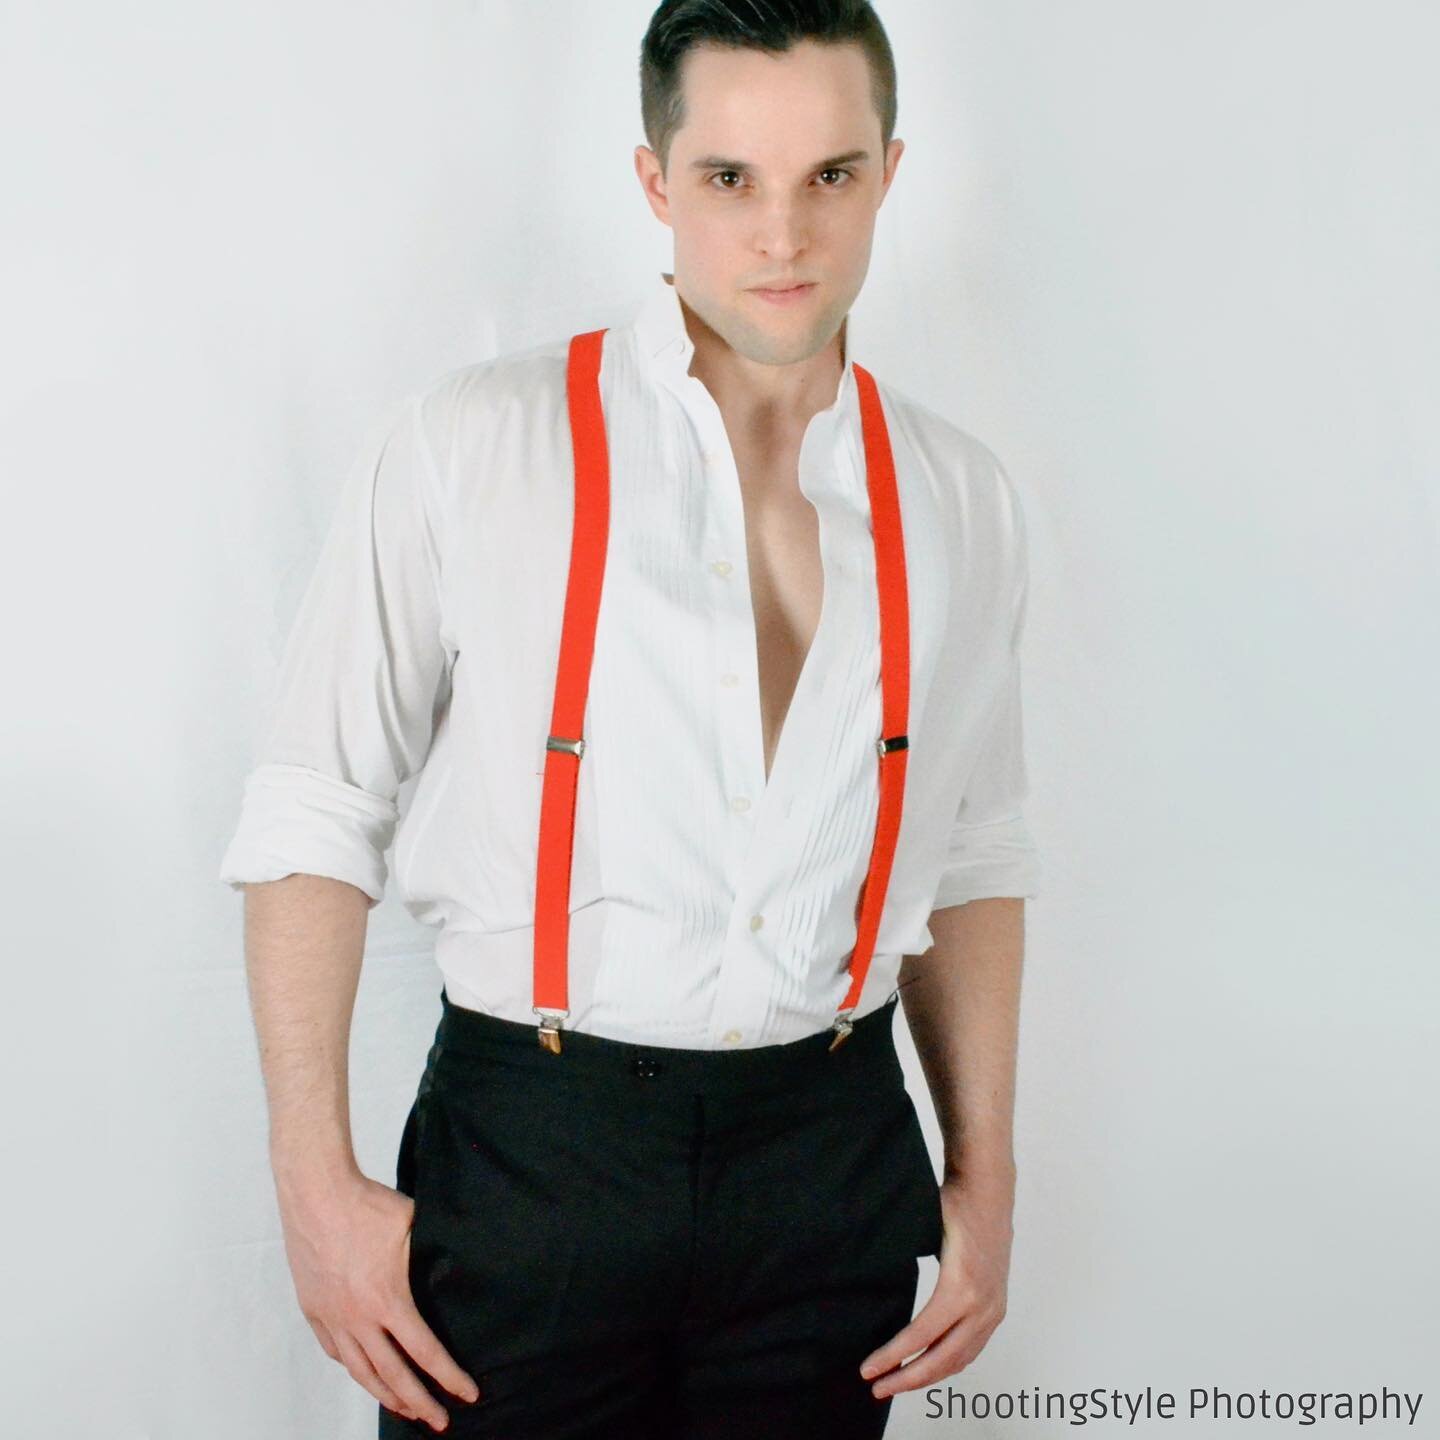 Doing my part to bring suspenders back into the mainstream. 

Fun throwback to a photoshoot I did with @shootinginstyle !

#model #modeling #photoshoot #gay #gayboy #instagay